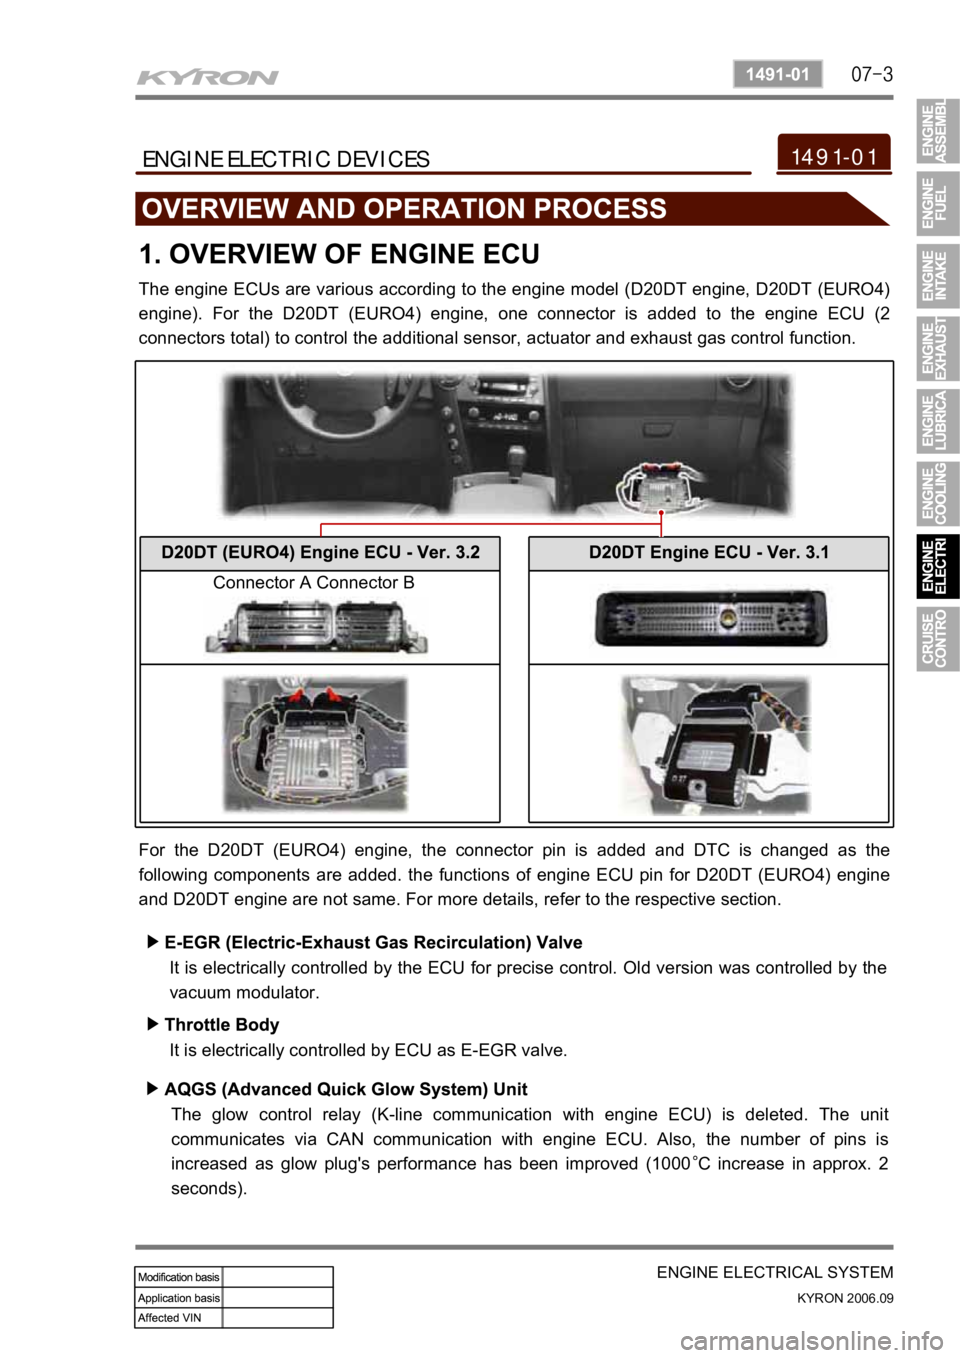 SSANGYONG KYRON 2006  Service Manual ENGINE ELECTRICAL SYSTEM
KYRON 2006.09
1491-01ENGINE ELECTRIC DEVICES
The engine ECUs are various according to the engine model (D20DT engine, D20DT (EURO4)
engine).  For  the  D20DT  (EURO4)  engine,